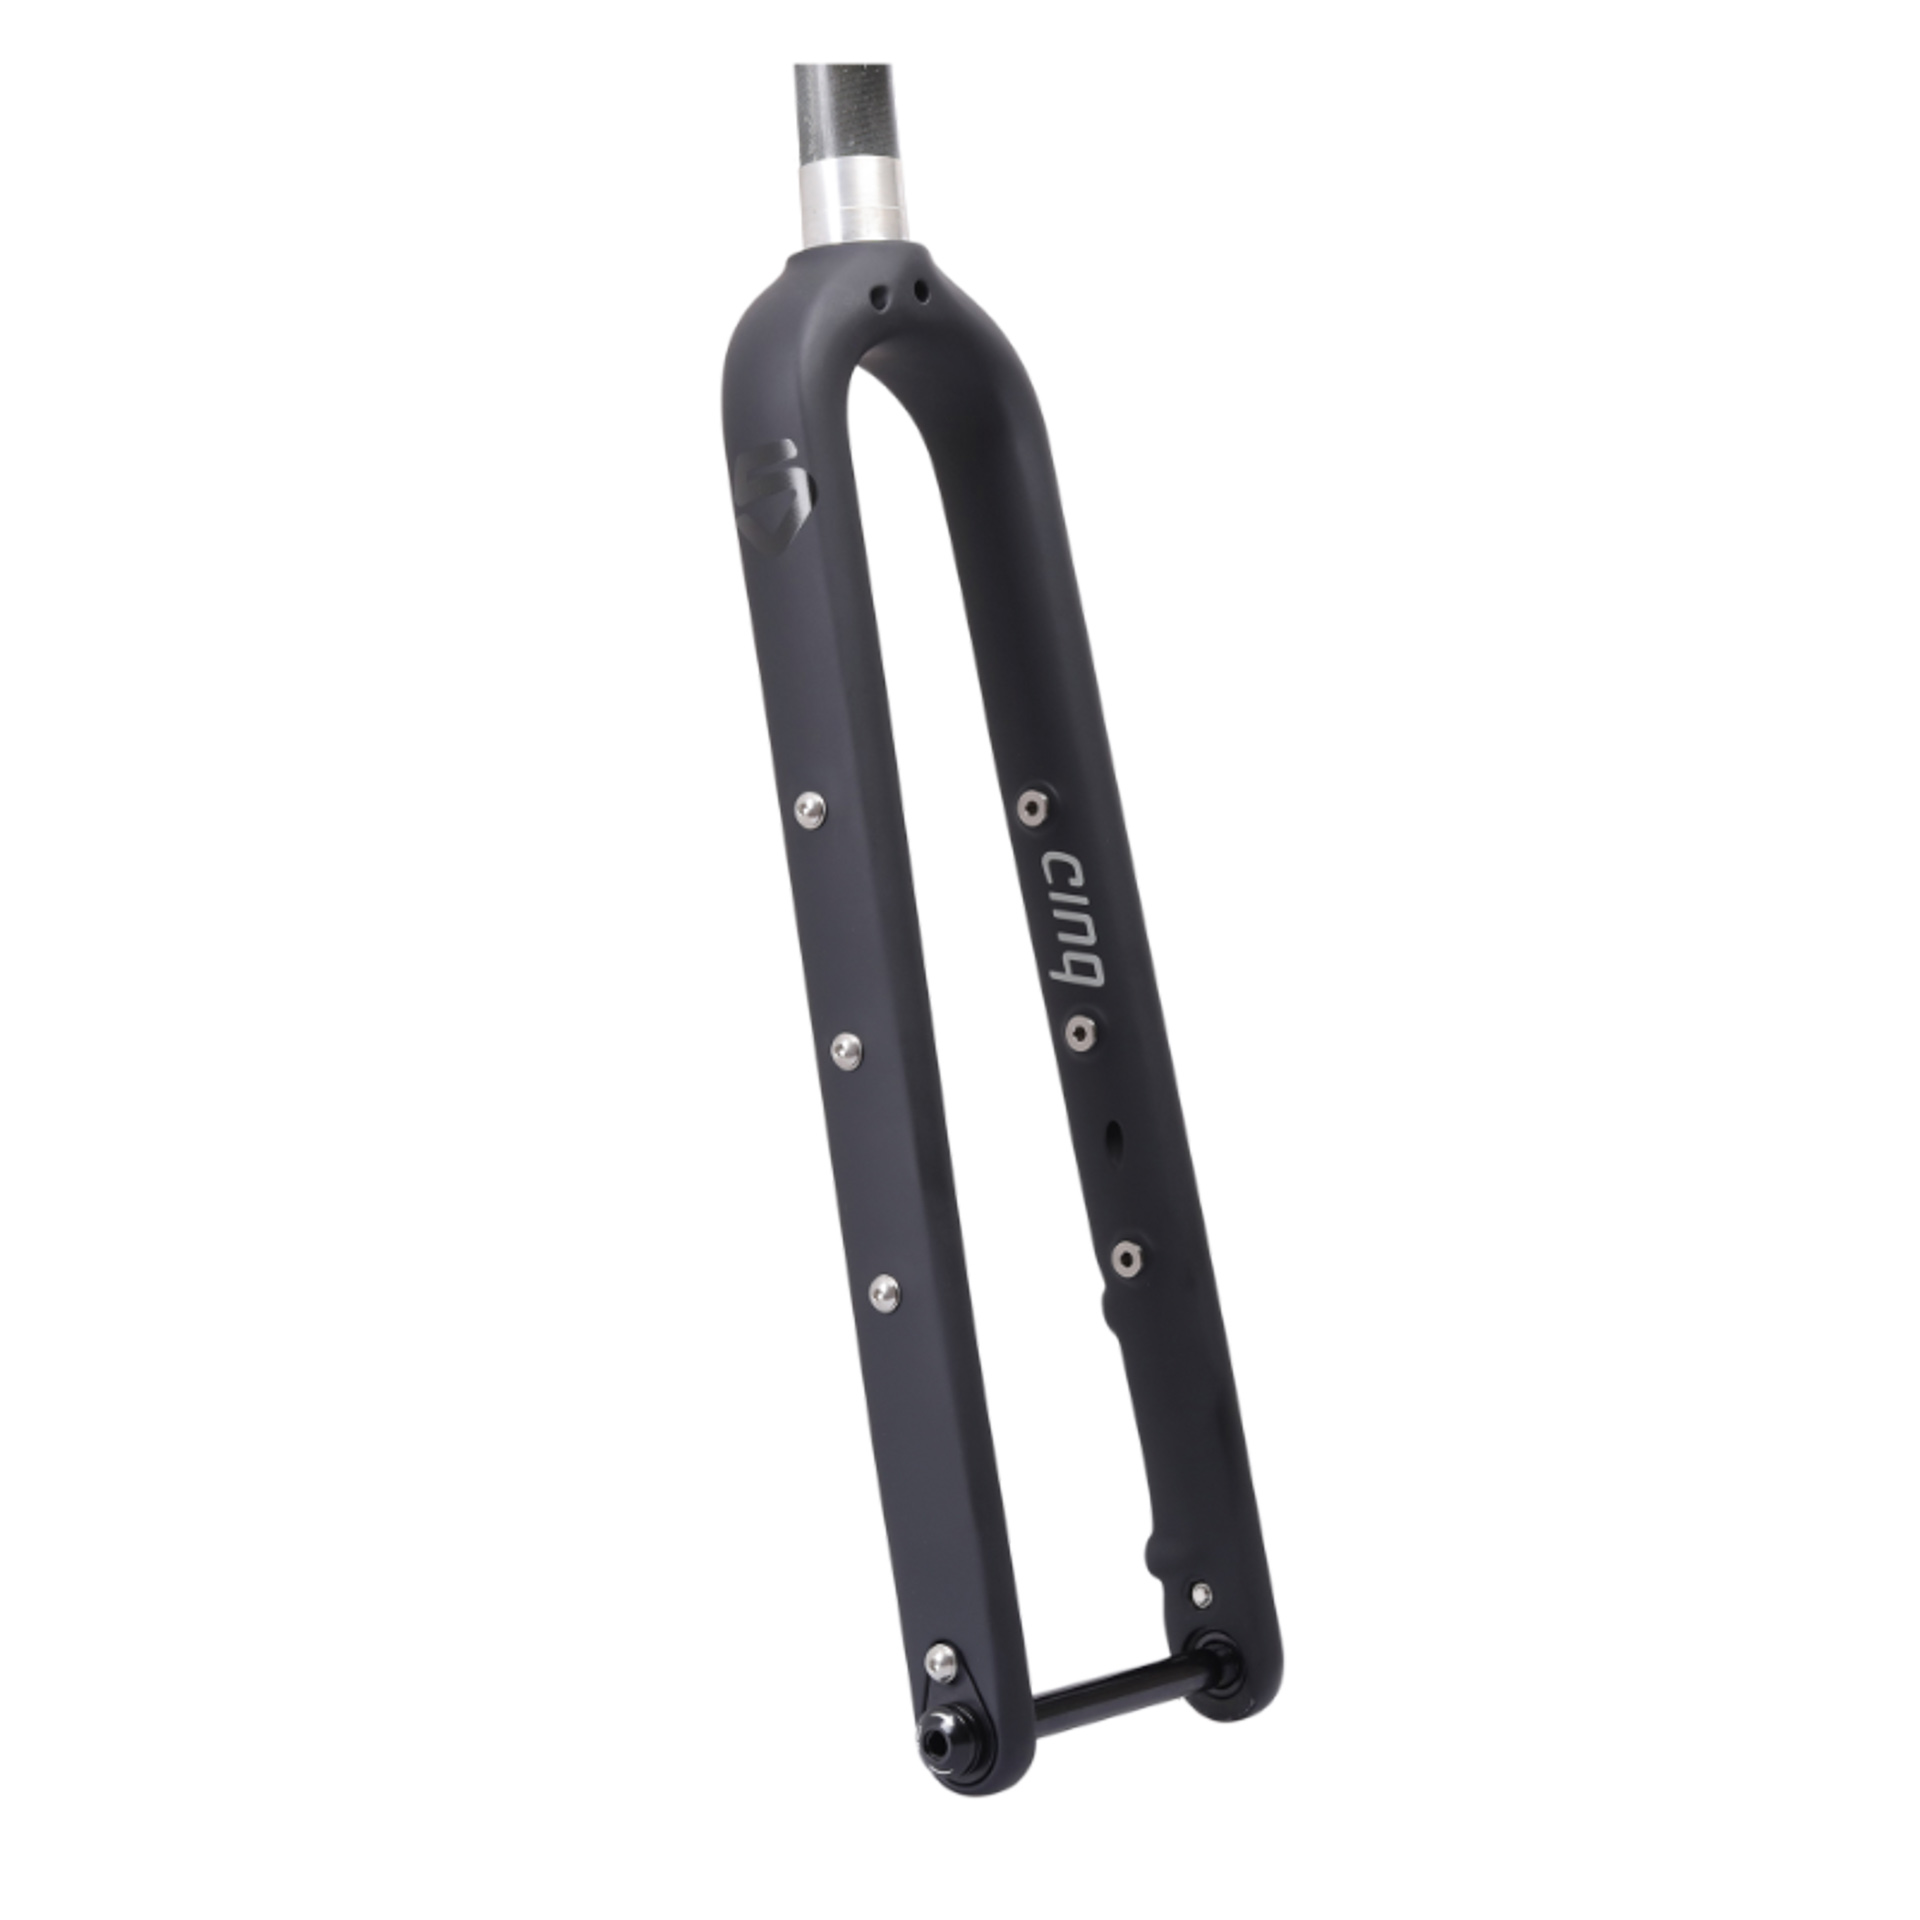 Cinq Touring Fork II